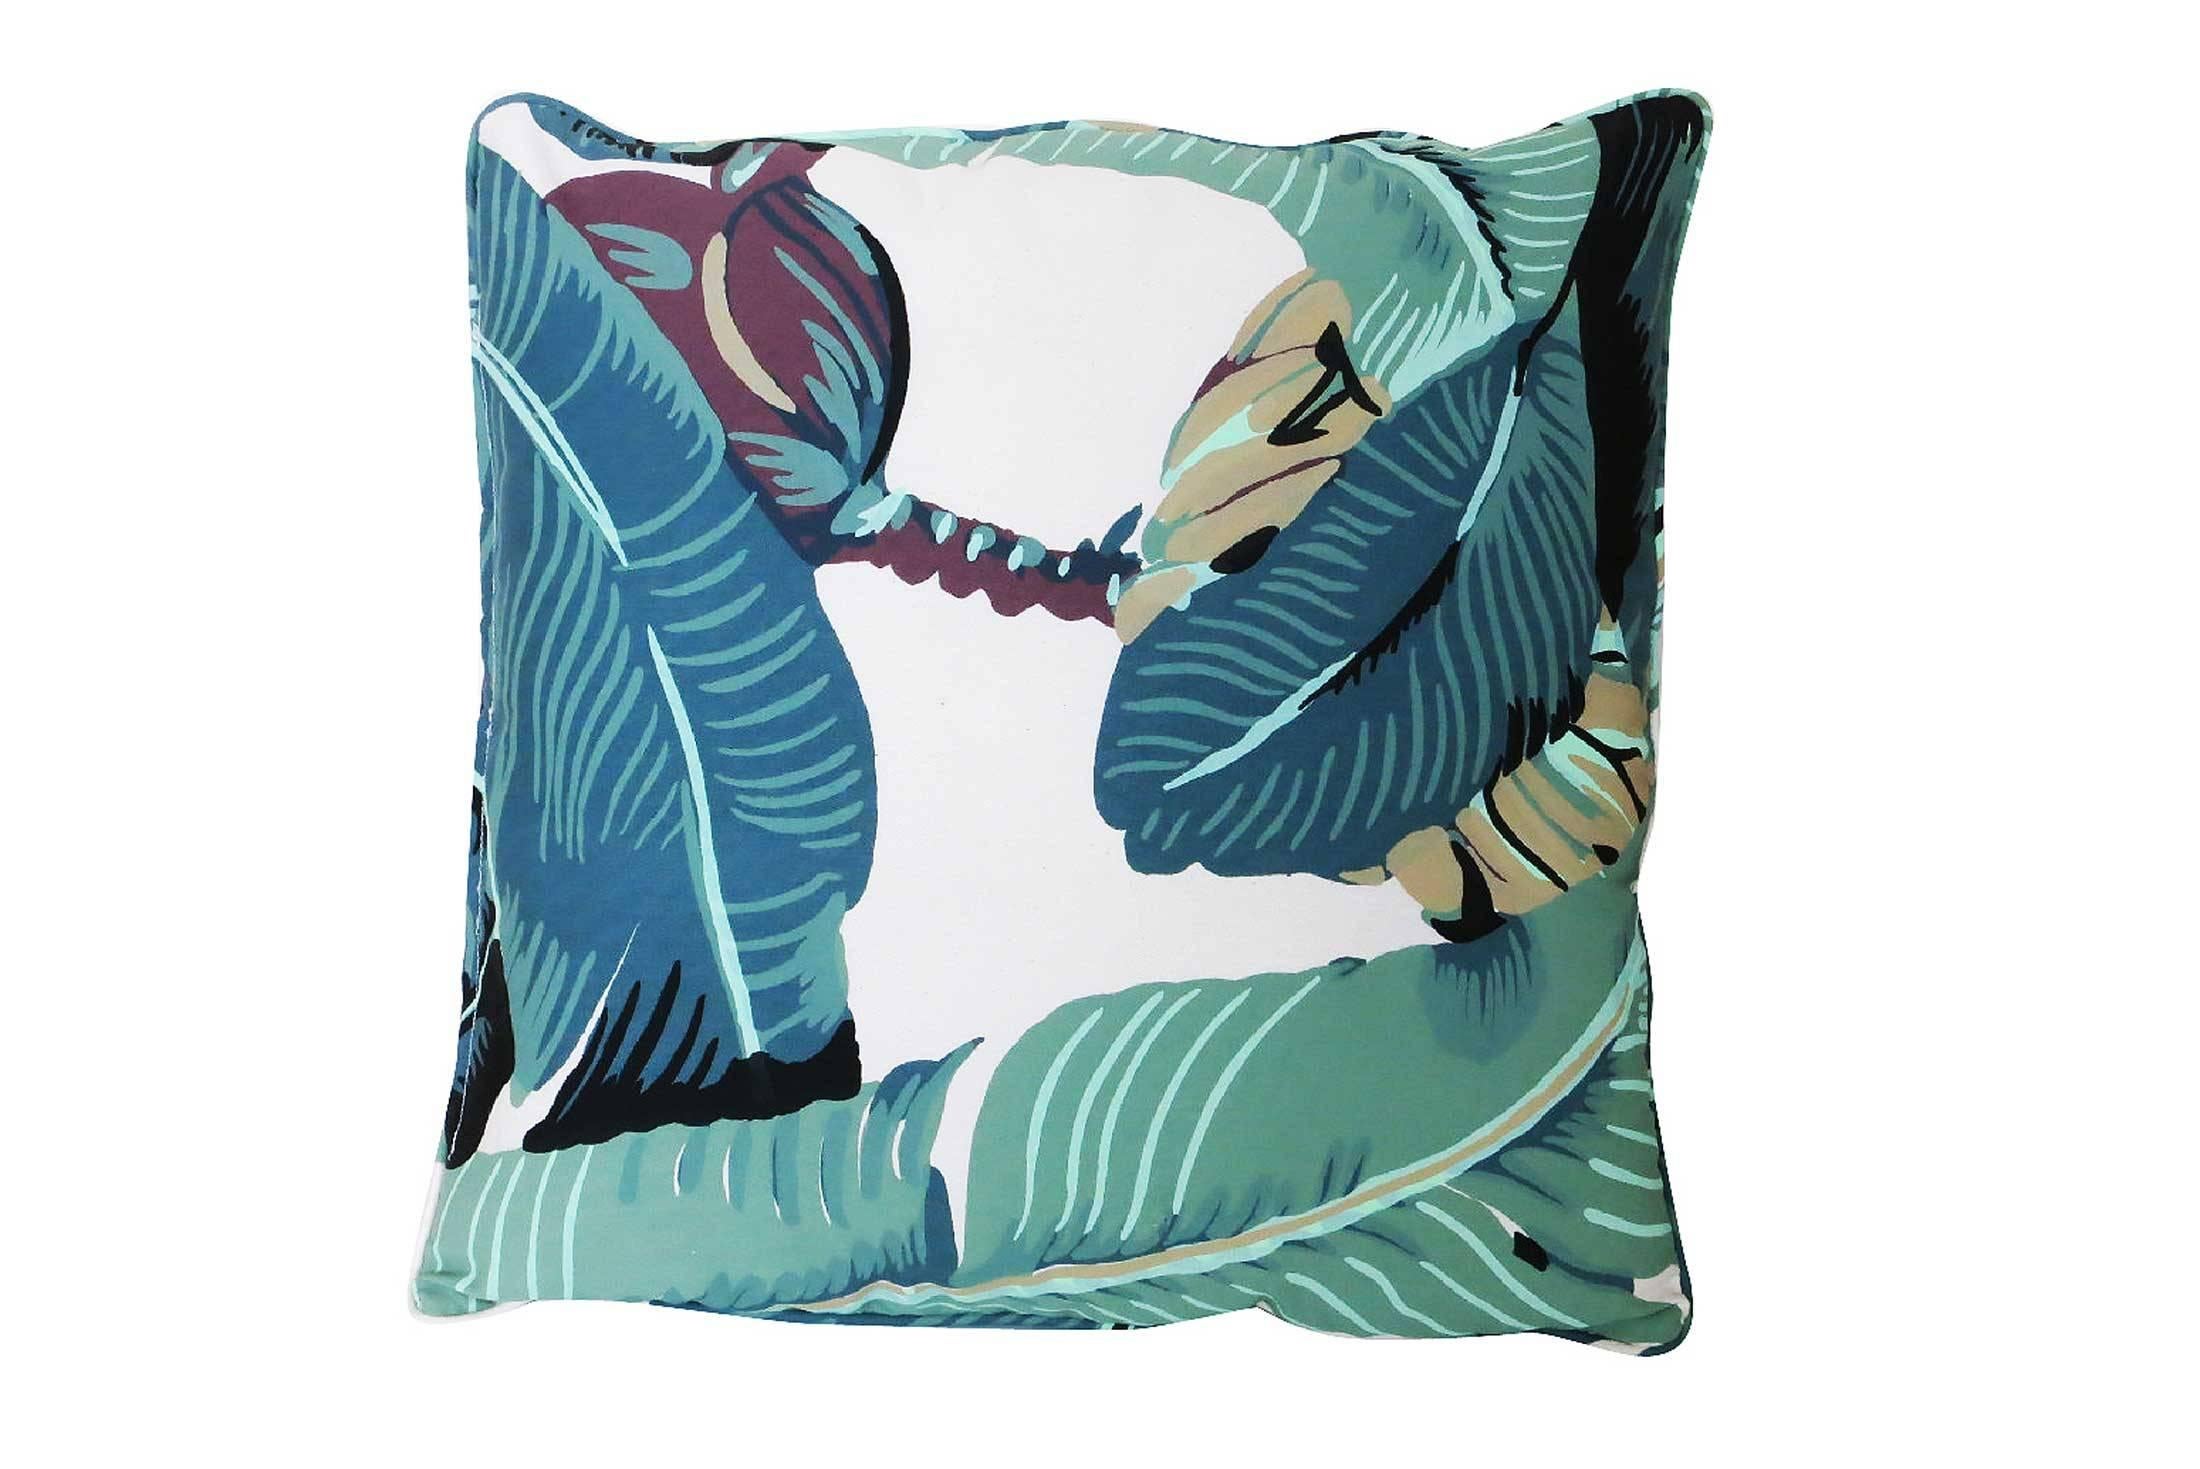 This is the fabric from The Beverly Hills Hotel, The Martinique Banana Leaf, unused throw pillow featuring a hand screened/painted Martinique fabric by the original manufacture in Los Angeles.

This pattern was created by decorator Don Loper in